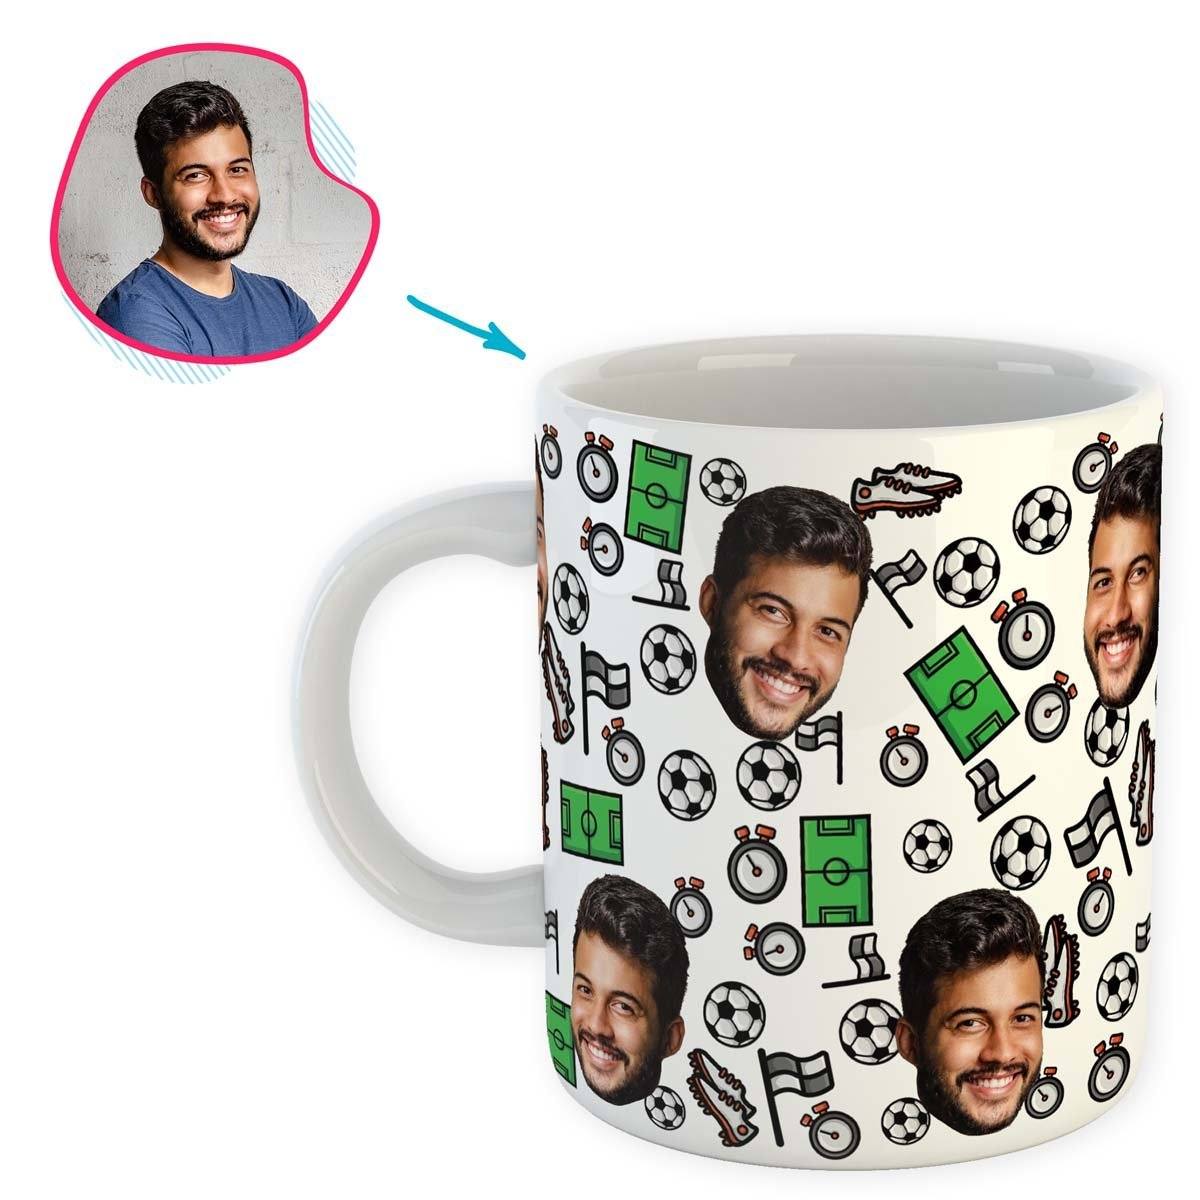 white Football mug personalized with photo of face printed on it